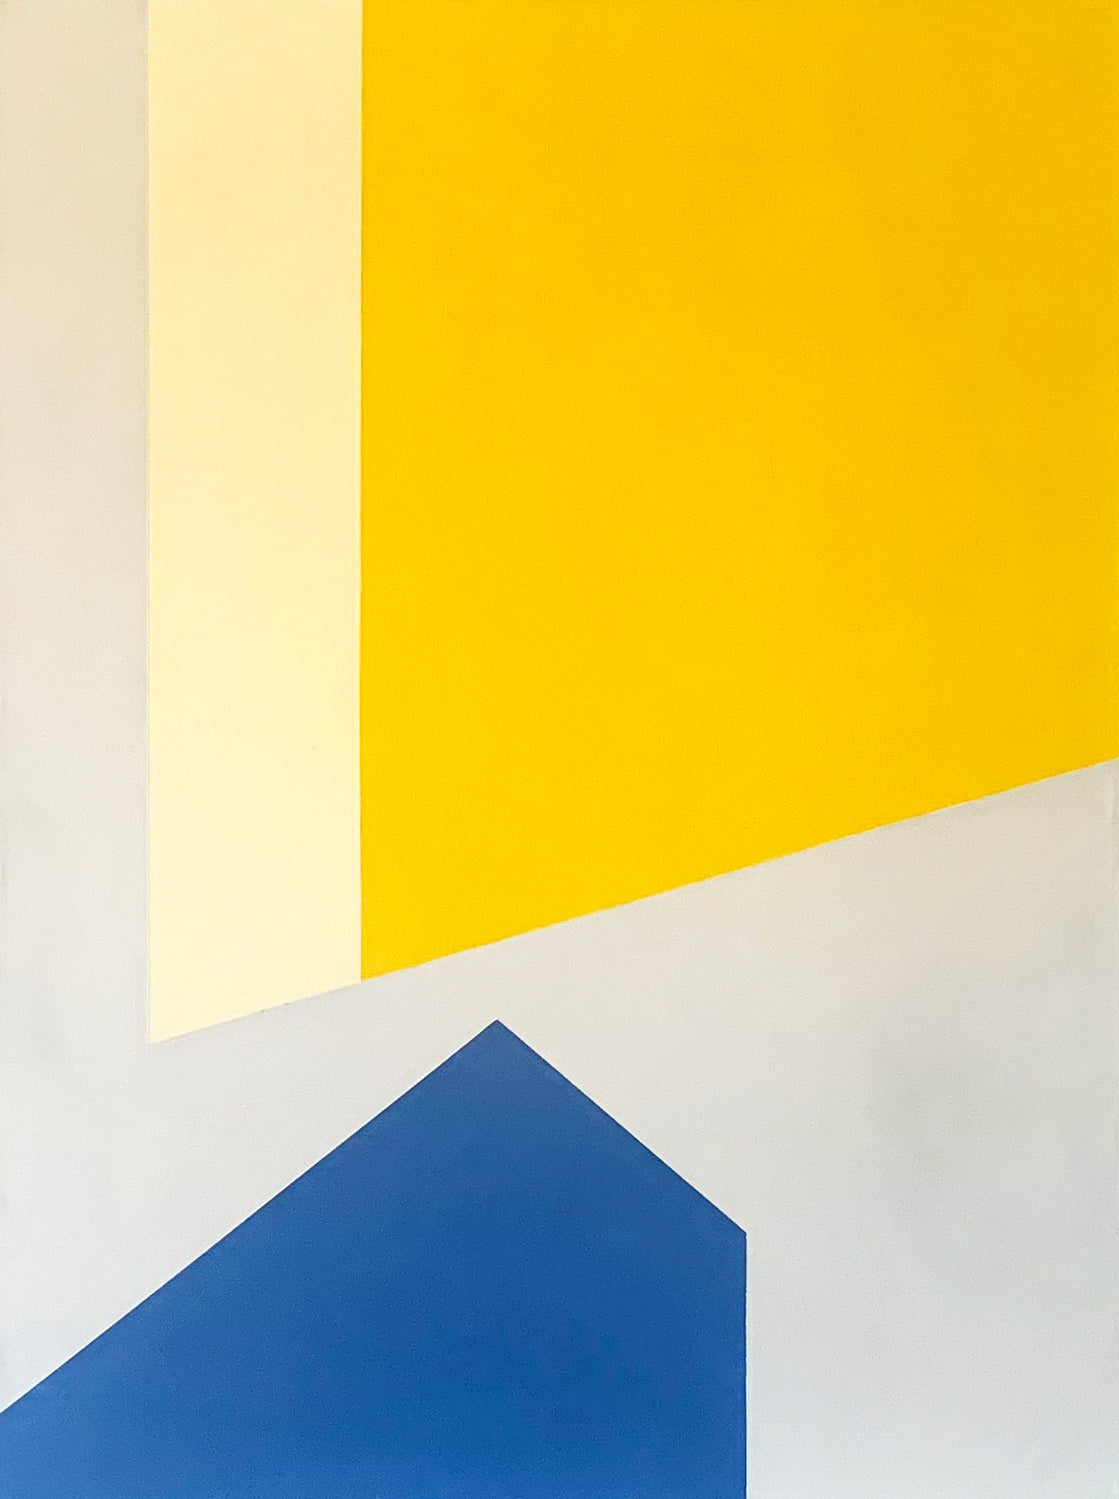 Yellow Blue Descent - Original Painting on Canvas, 36" x 48"